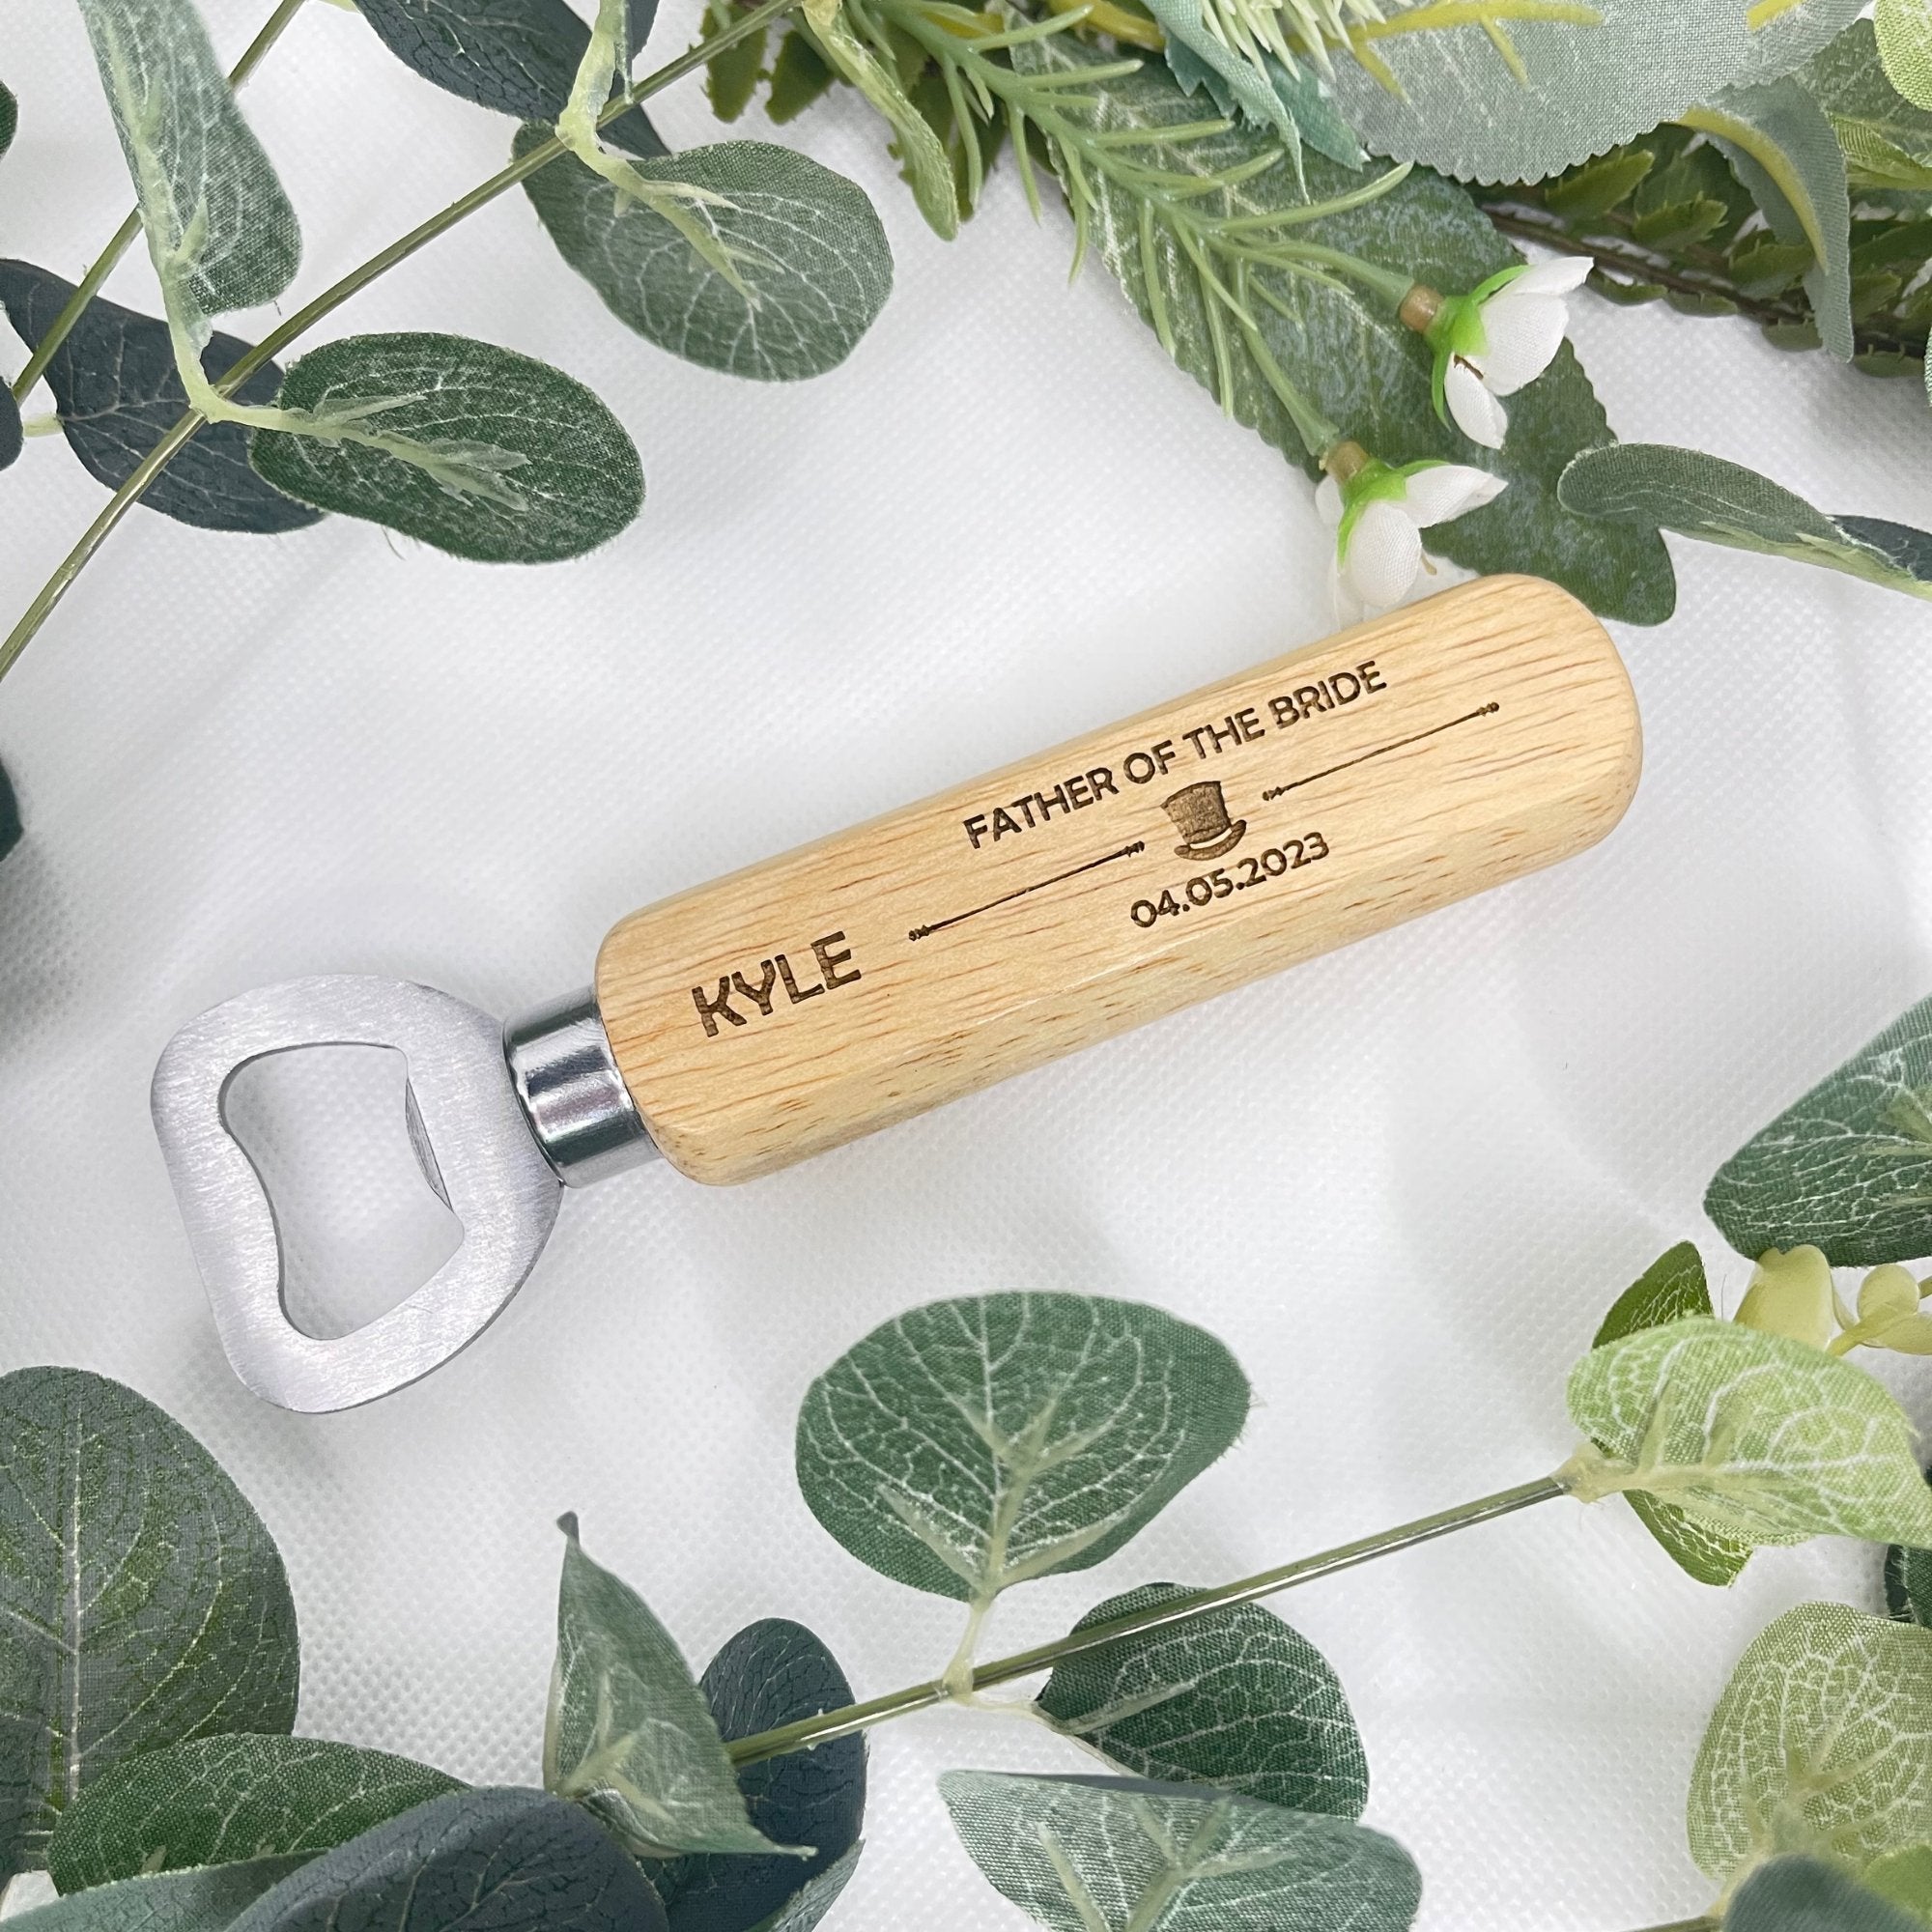 Make a toast to friendship and memorable moments with our Personalised Wedding Bottle Openers. Each piece, laser-engraved with a fun hat image, commemorates your special day while serving as a useful keepsake. Crafted from durable stainless steel and wood, these openers are personalised with the recipient's name, their role in the wedding, and the date of the event. A lasting memento that's both stylish and functional. Please hand wash only. For personalisation, provide: name, role, and wedding date.